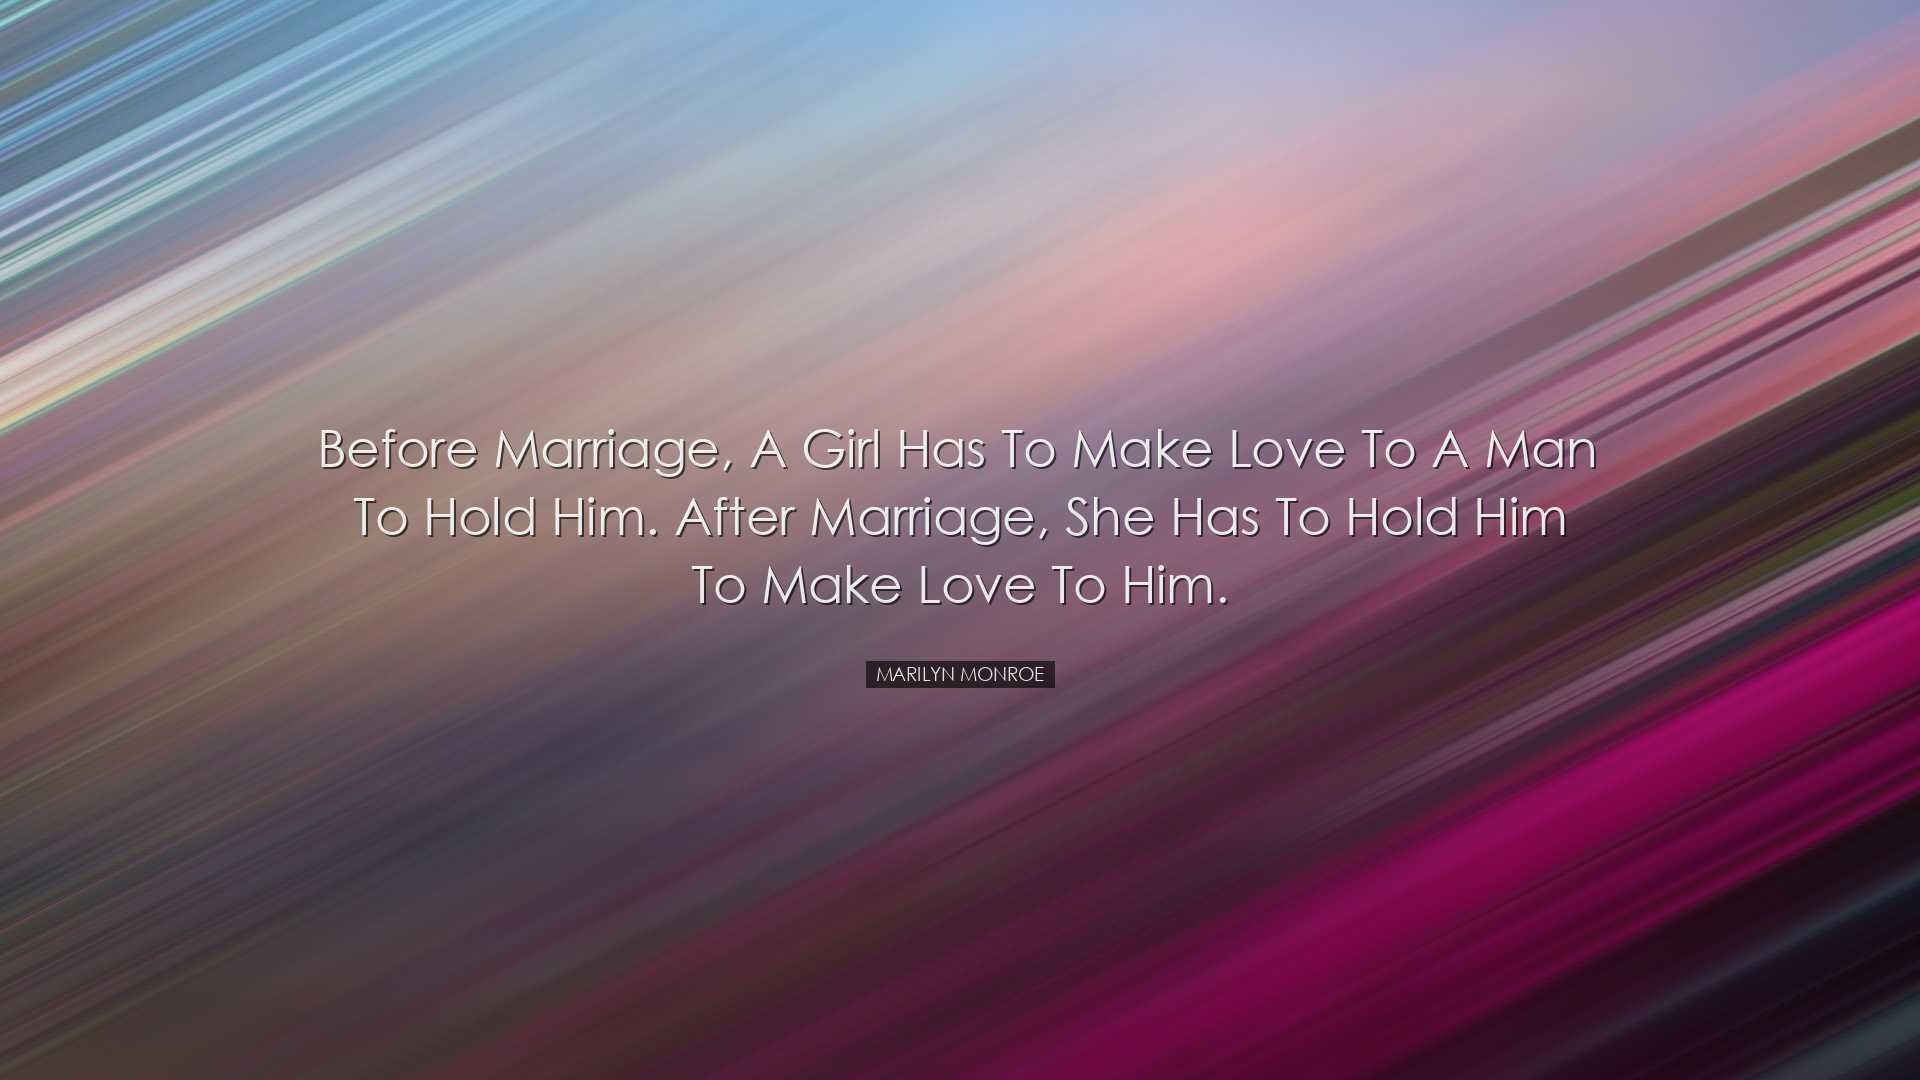 Before marriage, a girl has to make love to a man to hold him. Aft